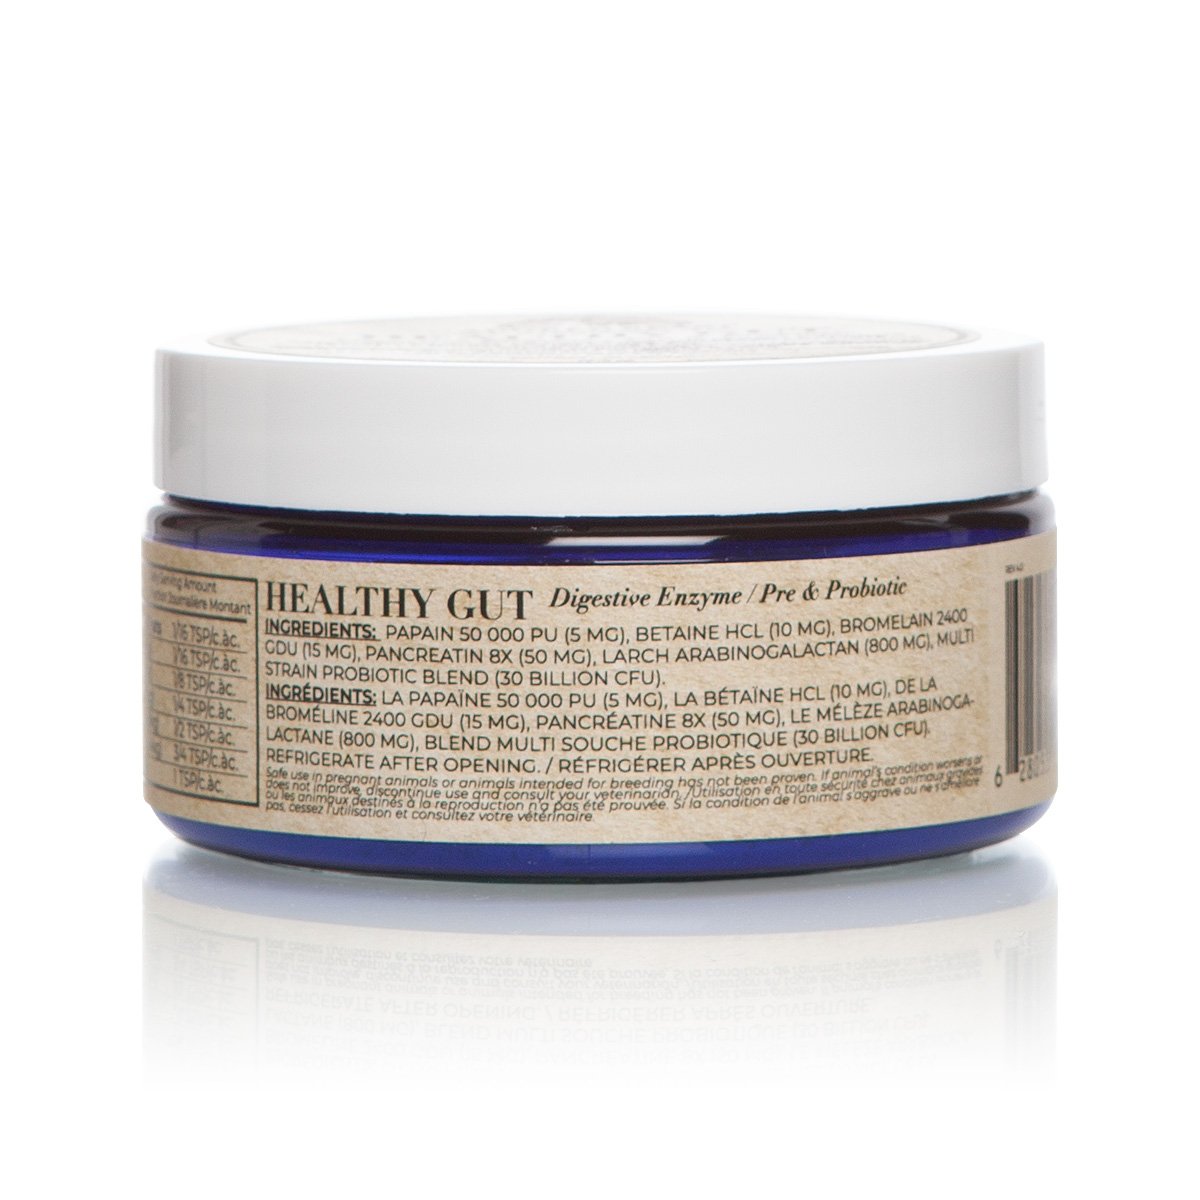 Adored Beast Apothecary Healthy Gut Digestive Enzyme